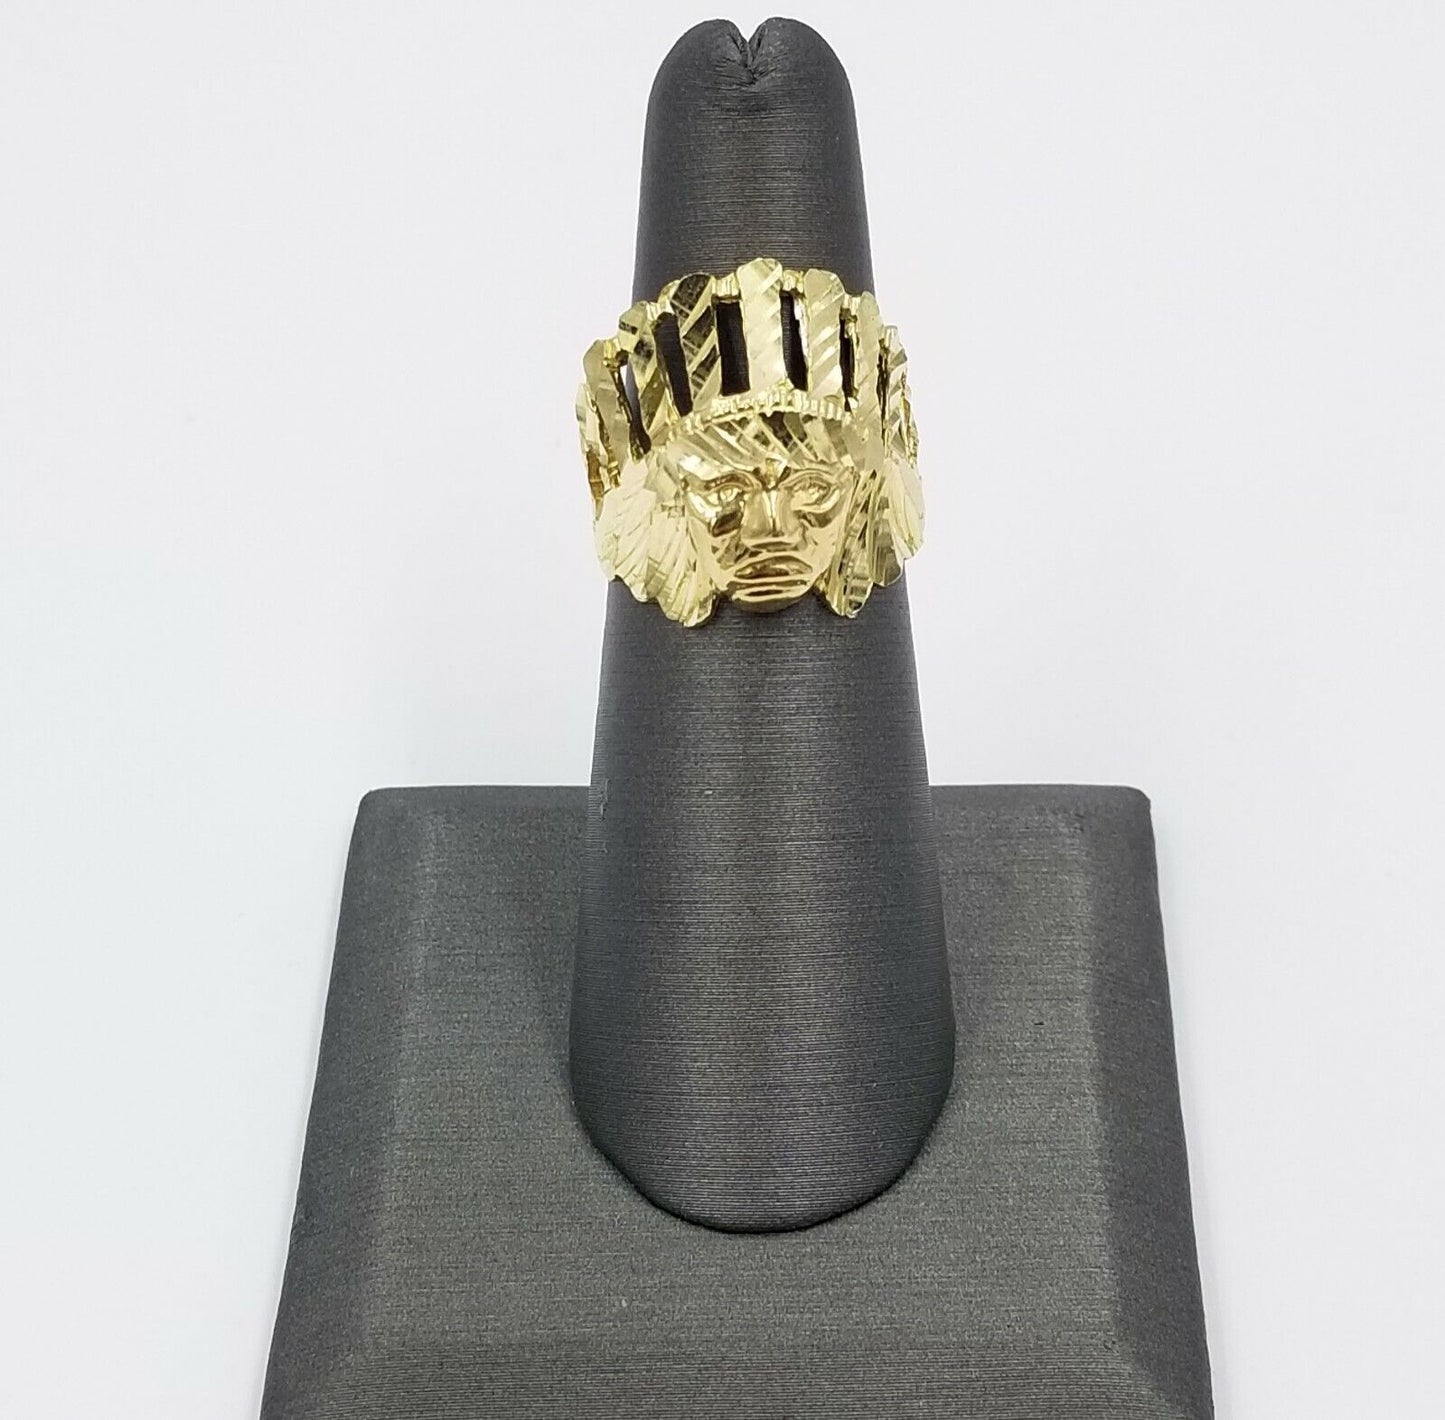 Real 10k Indian Head Yellow Gold Men's Ring Diamond Cut Pinky Thick band